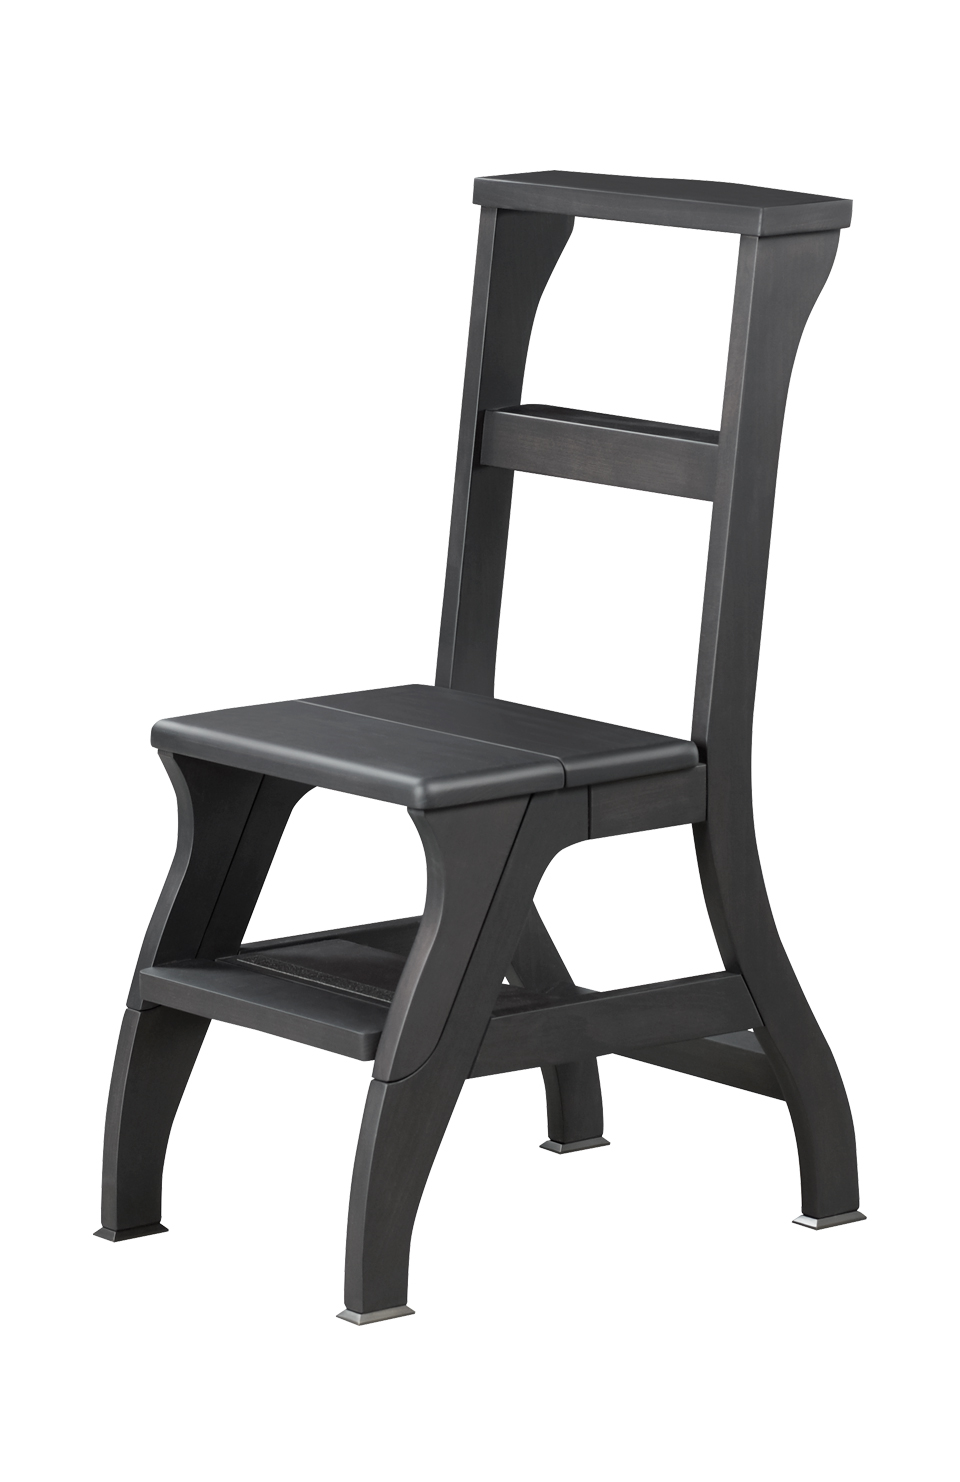 /mediaRebecca%20is%20a%20wooden%20convertile%20ladder-chair%20with%20metal%20or%20bronze%20feet,%20from%20Promemoria's%20catalogue%20|%20Promemoria